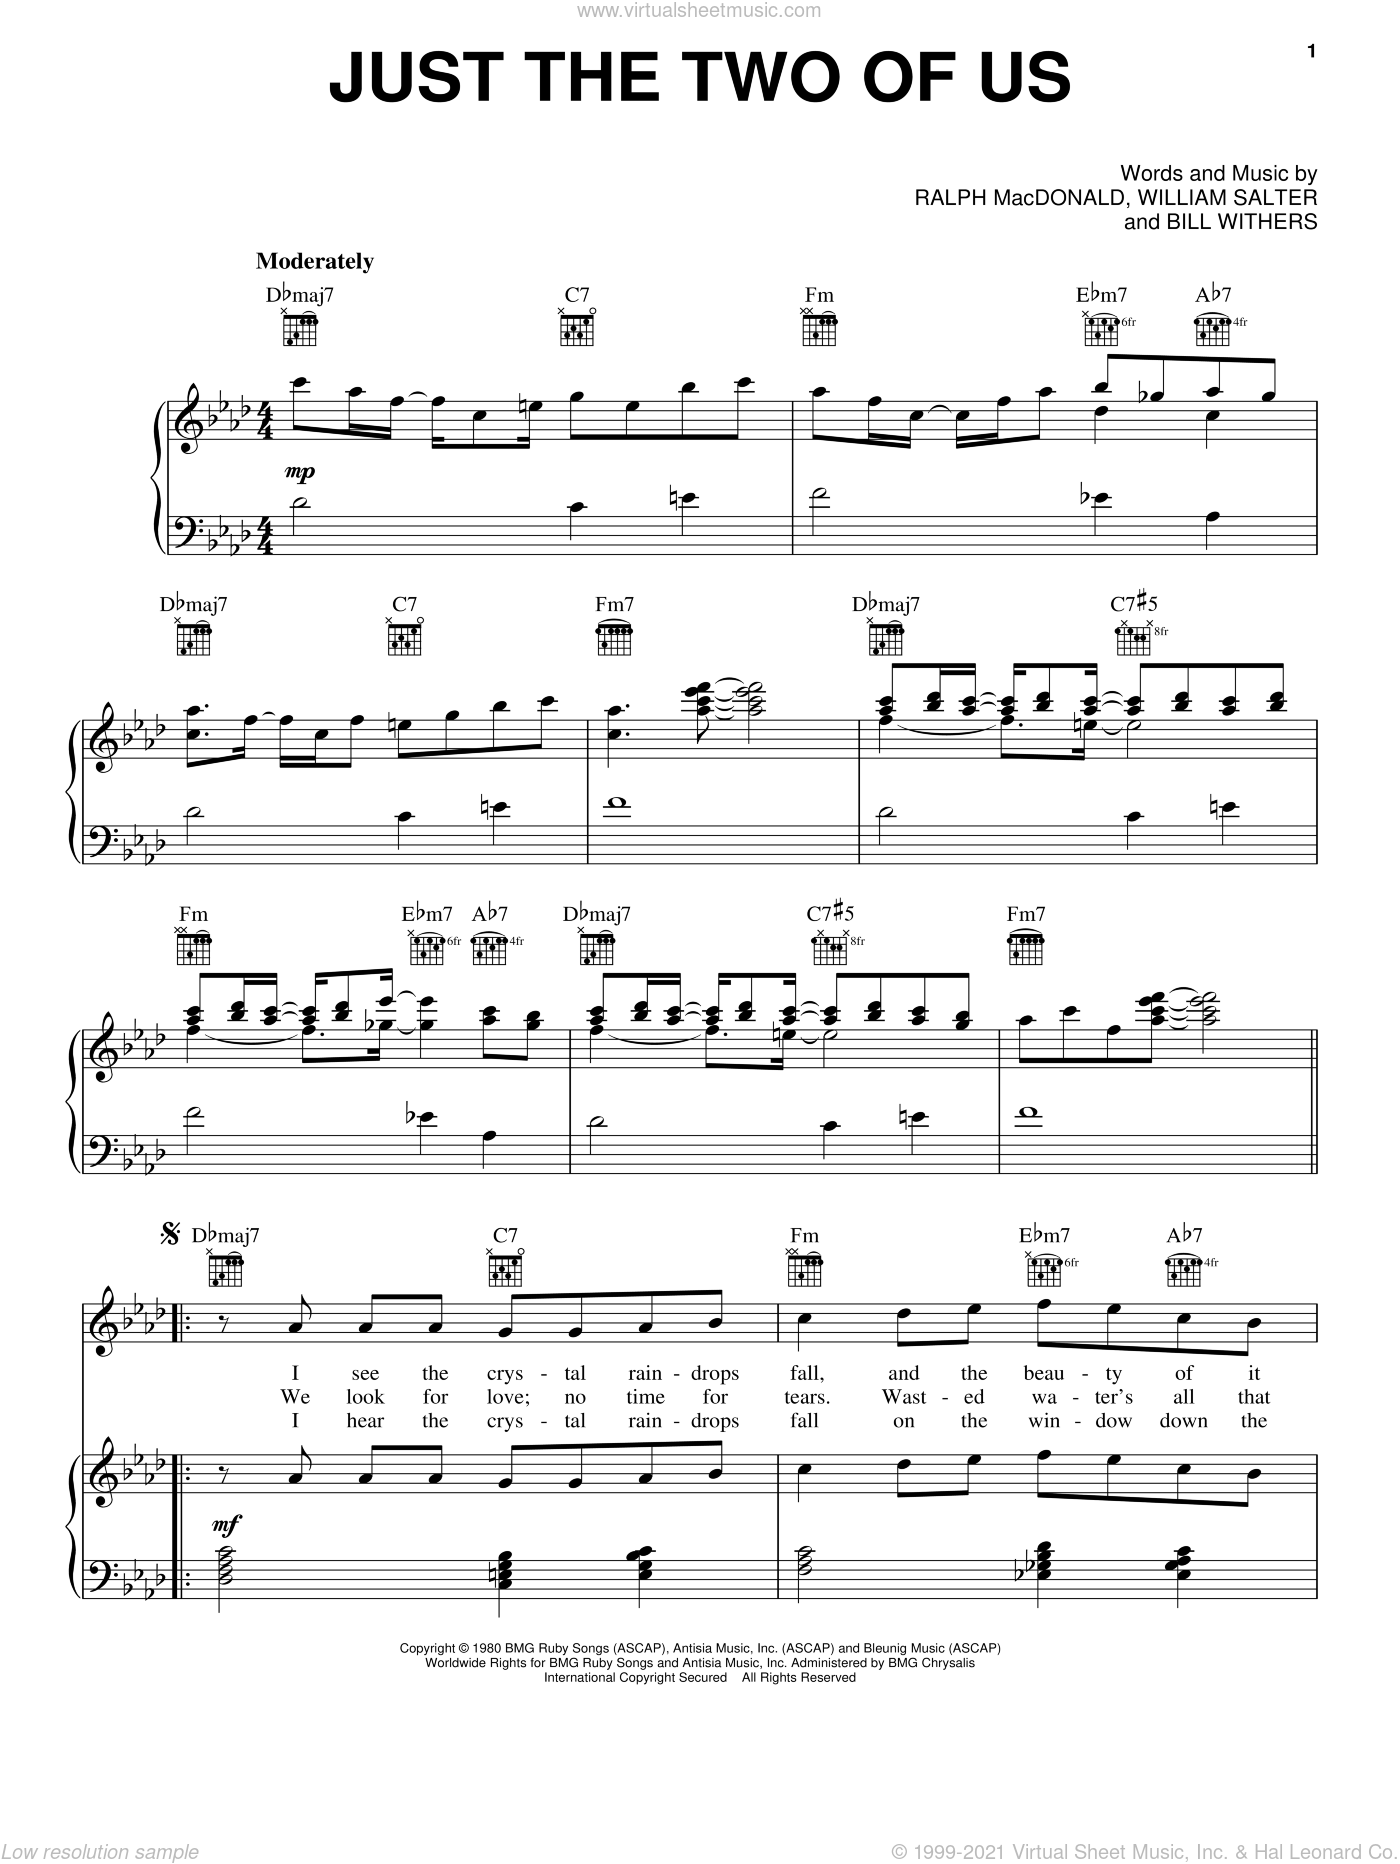 Two Of Us Sheet music for Piano (Solo)